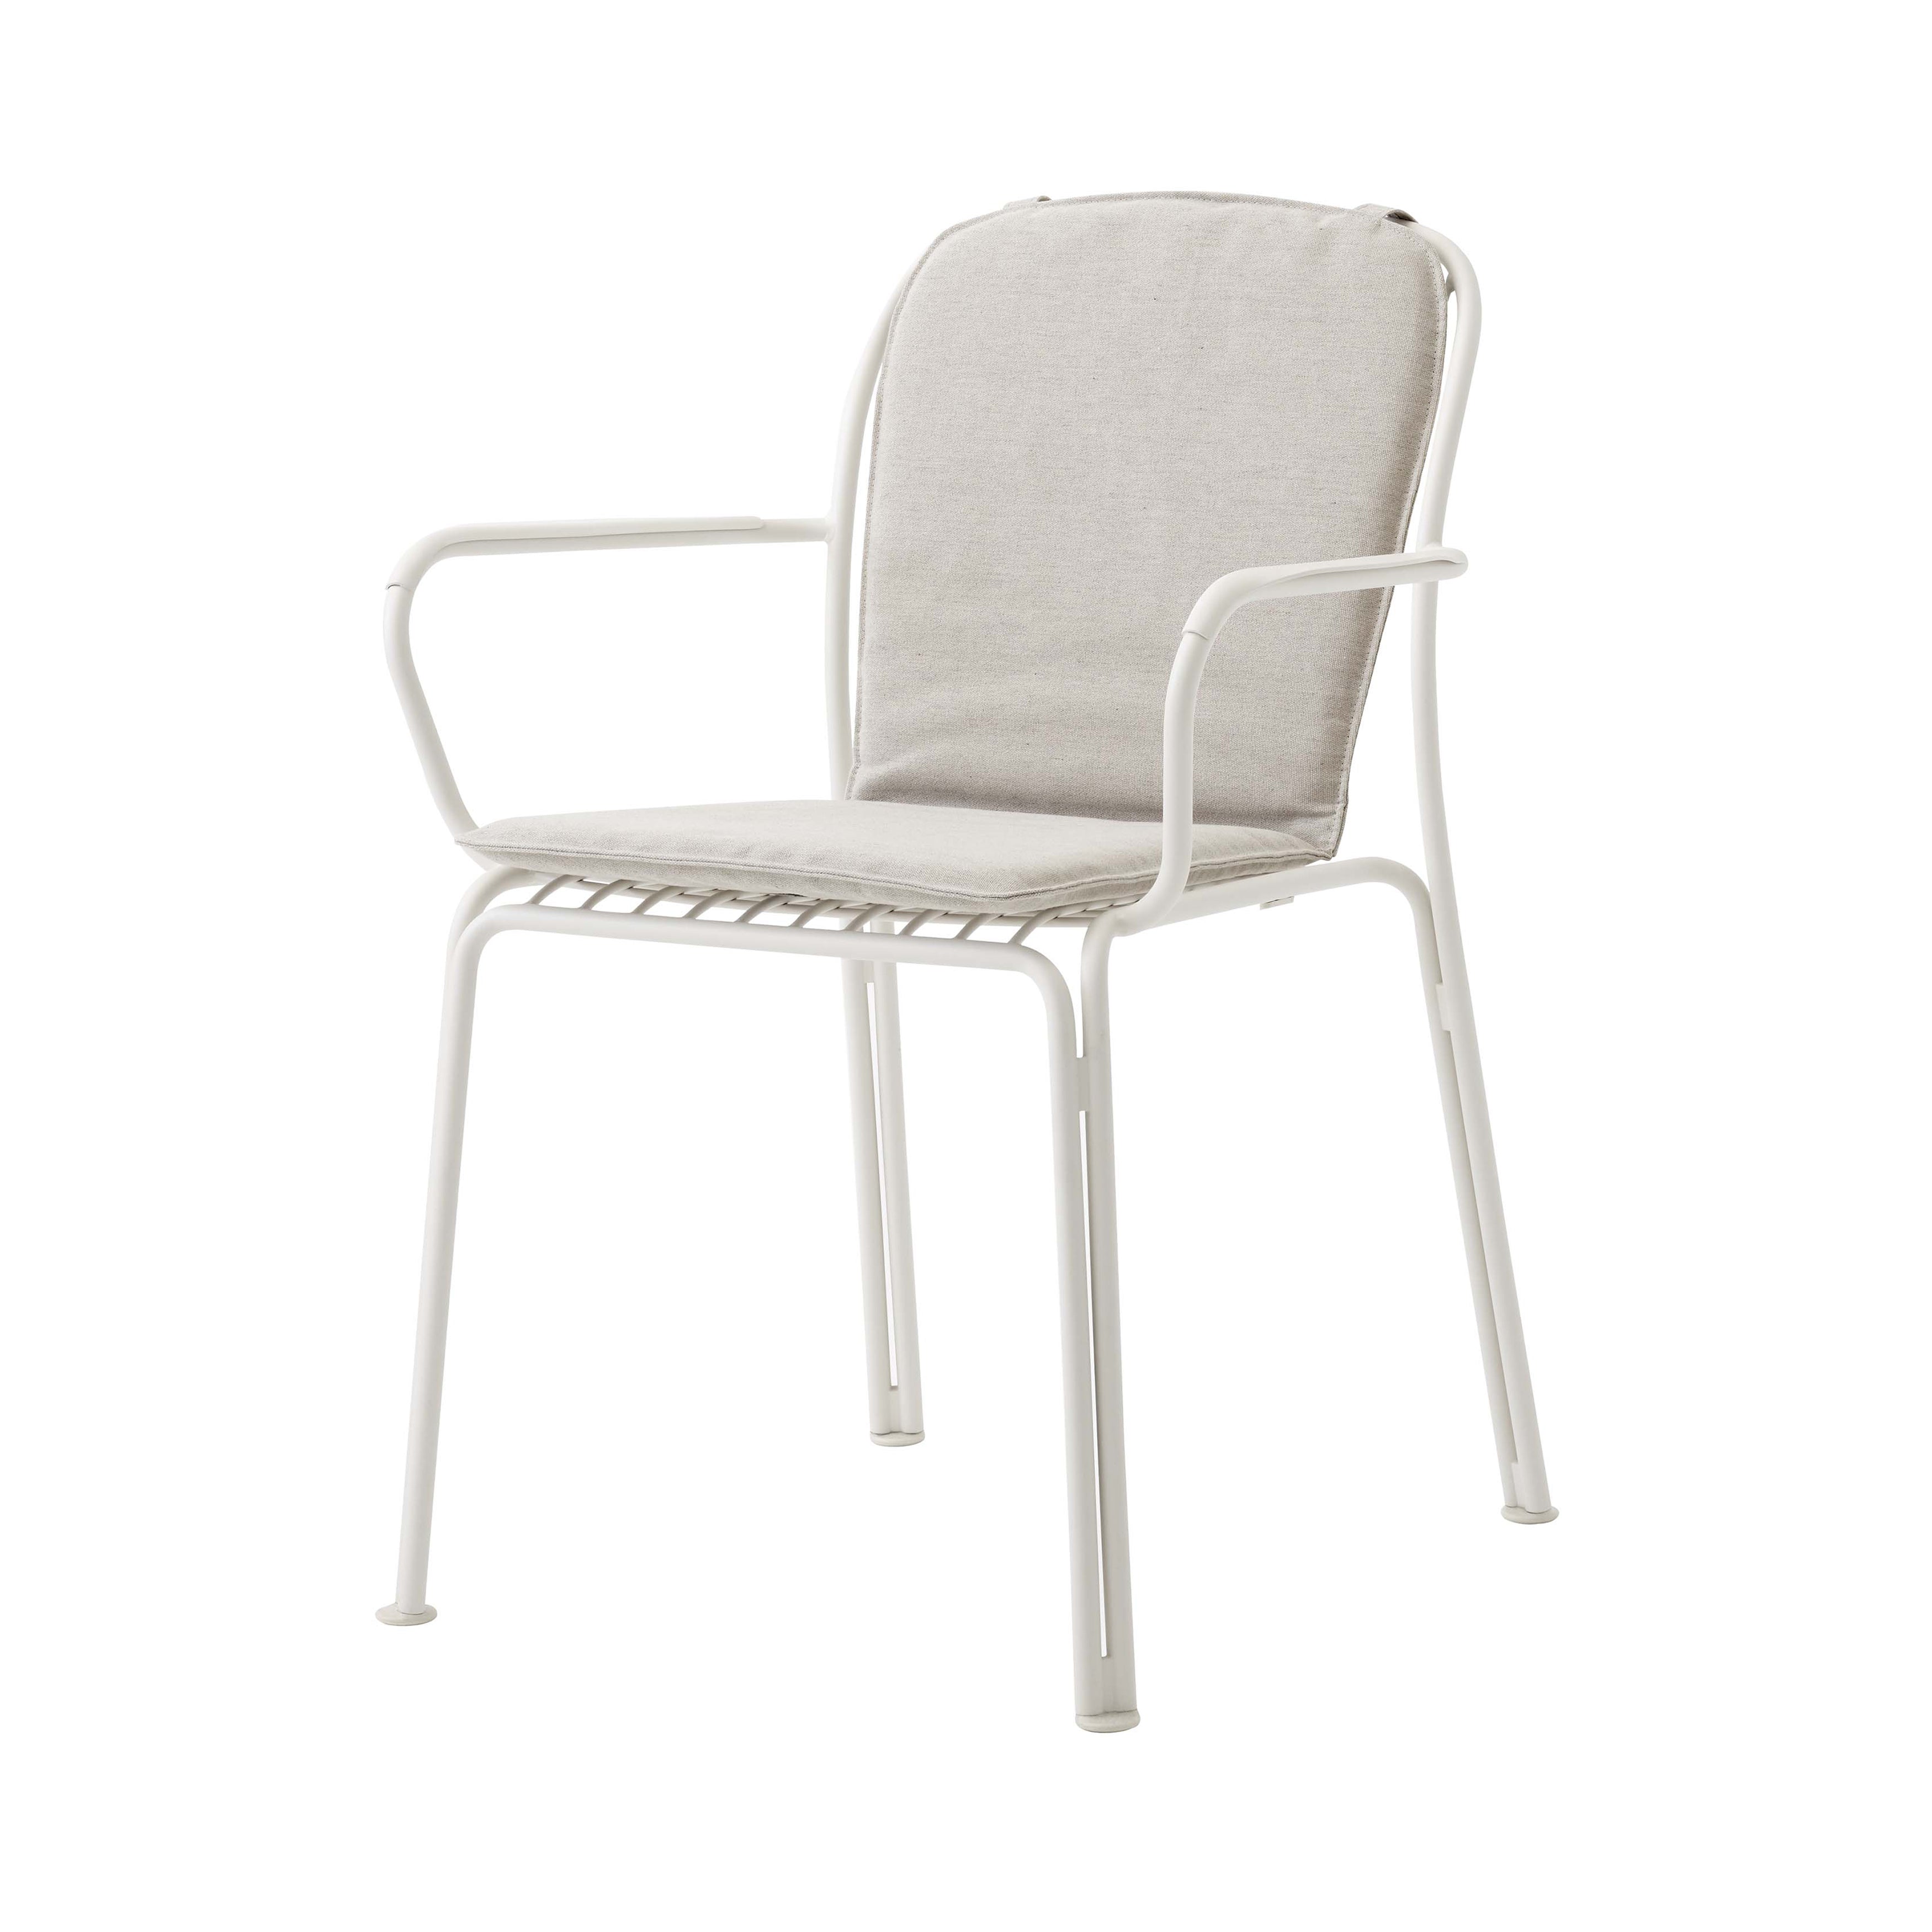 Thorvald SC95 Armchair: Outdoor + Ivory + With Heritage Papyrus Cushion